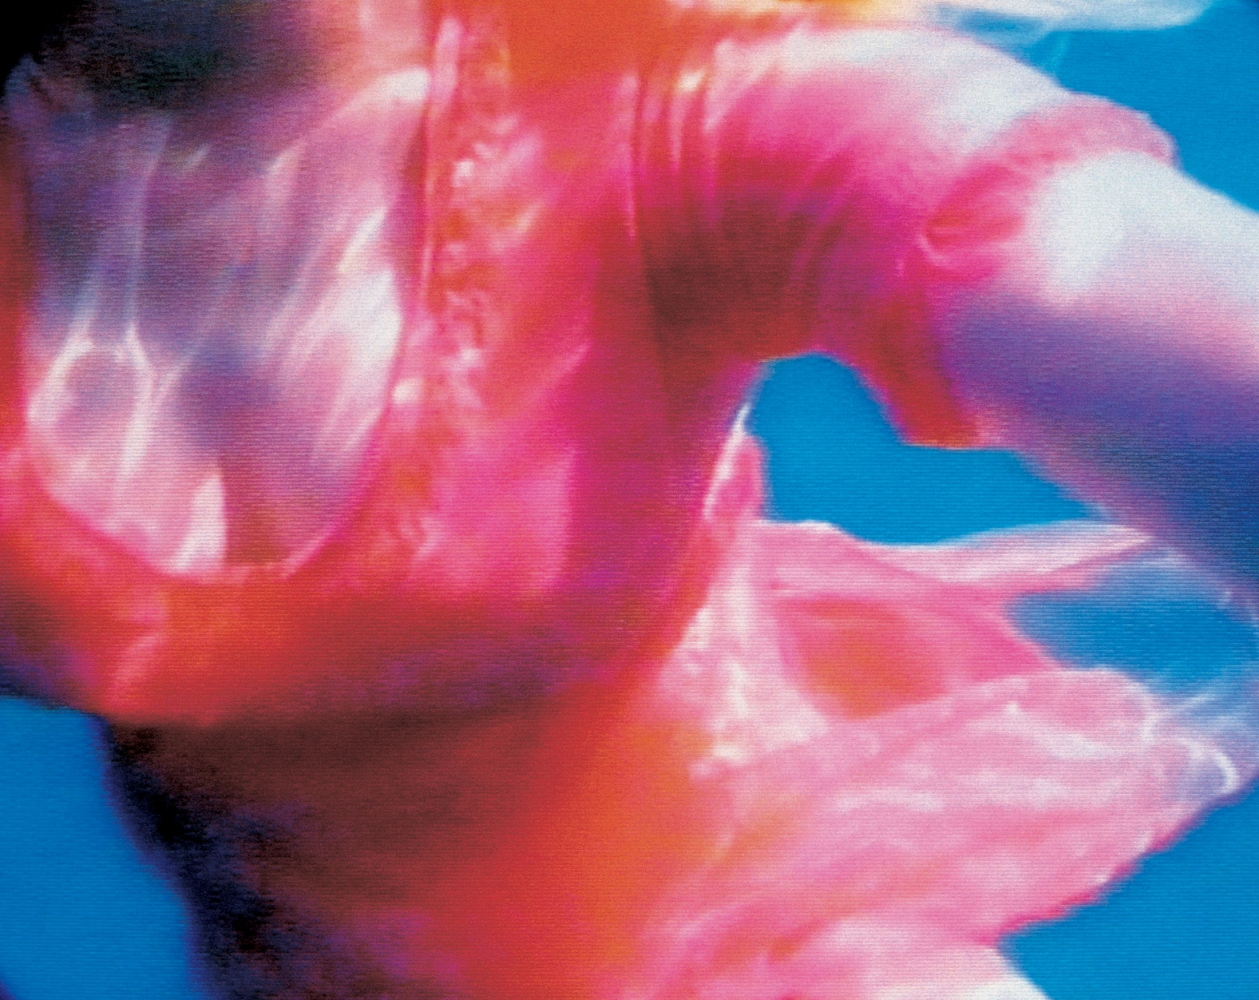 Pipilotti Rist
Sip My Ocean, 1996
Two-channel video and sound installation, color, with carpet
​Video still
Duration: 10 minutes, 22 seconds